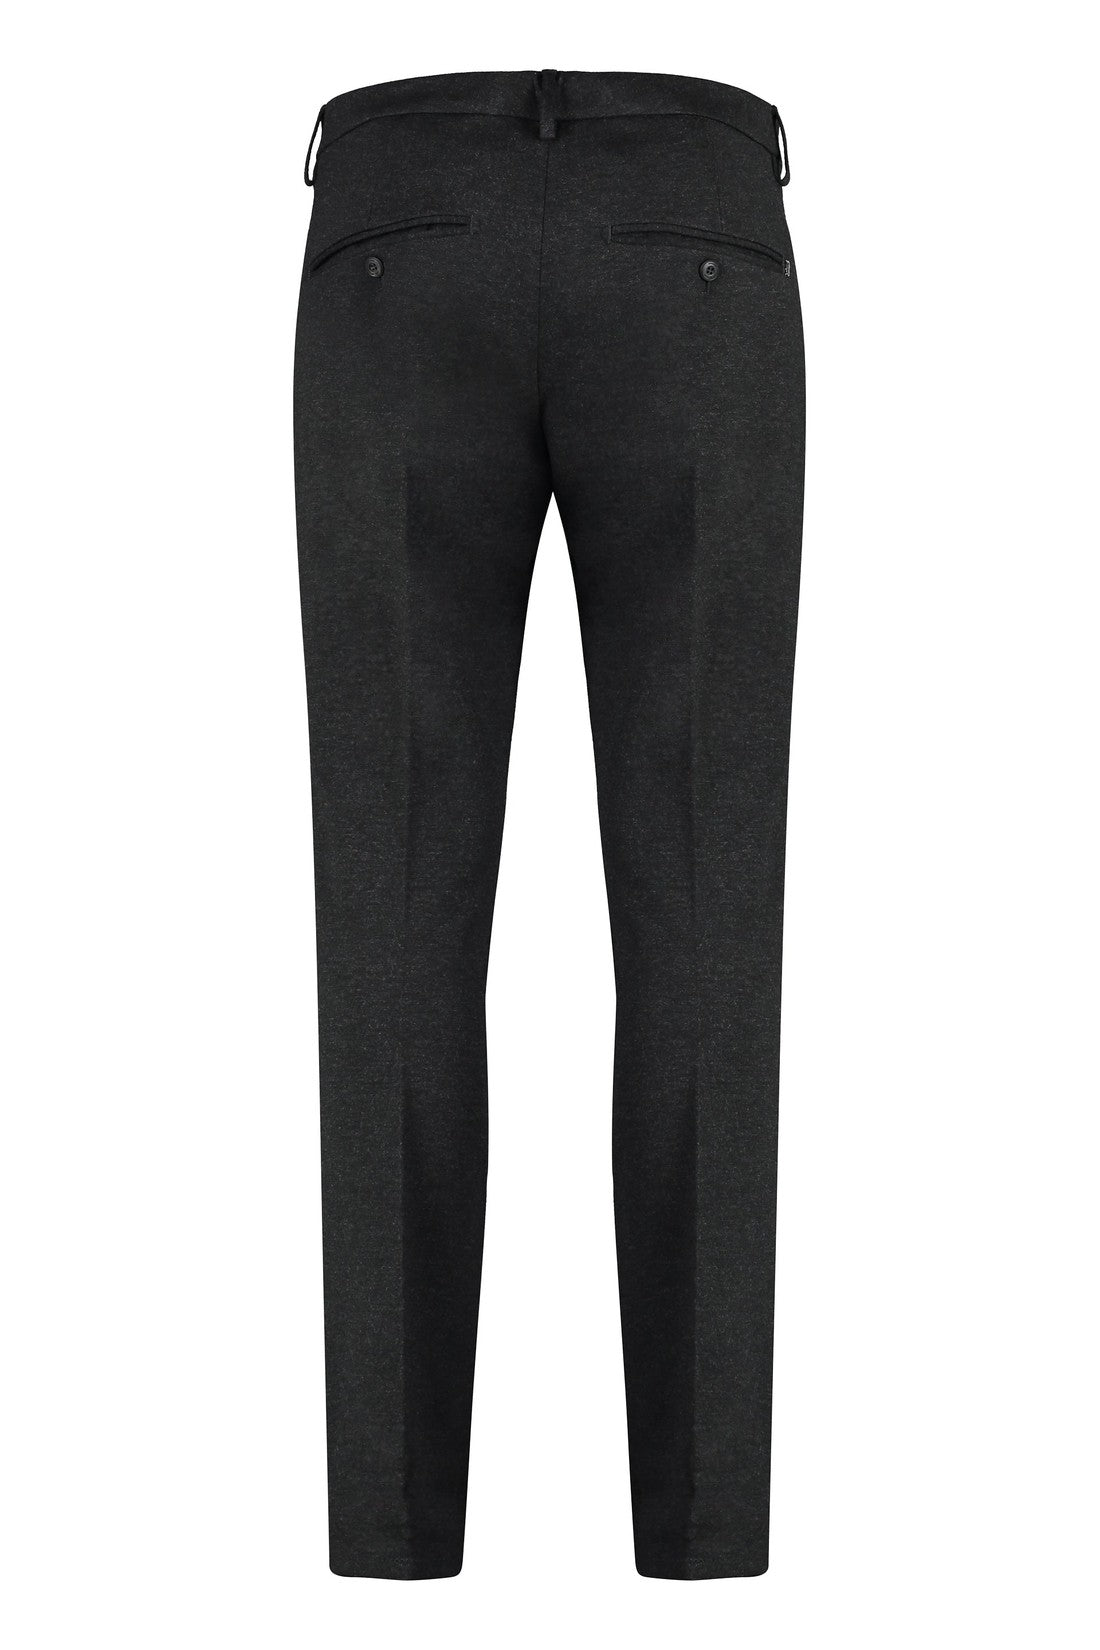 Dondup-OUTLET-SALE-Gaubert chino pants in viscose blend-ARCHIVIST